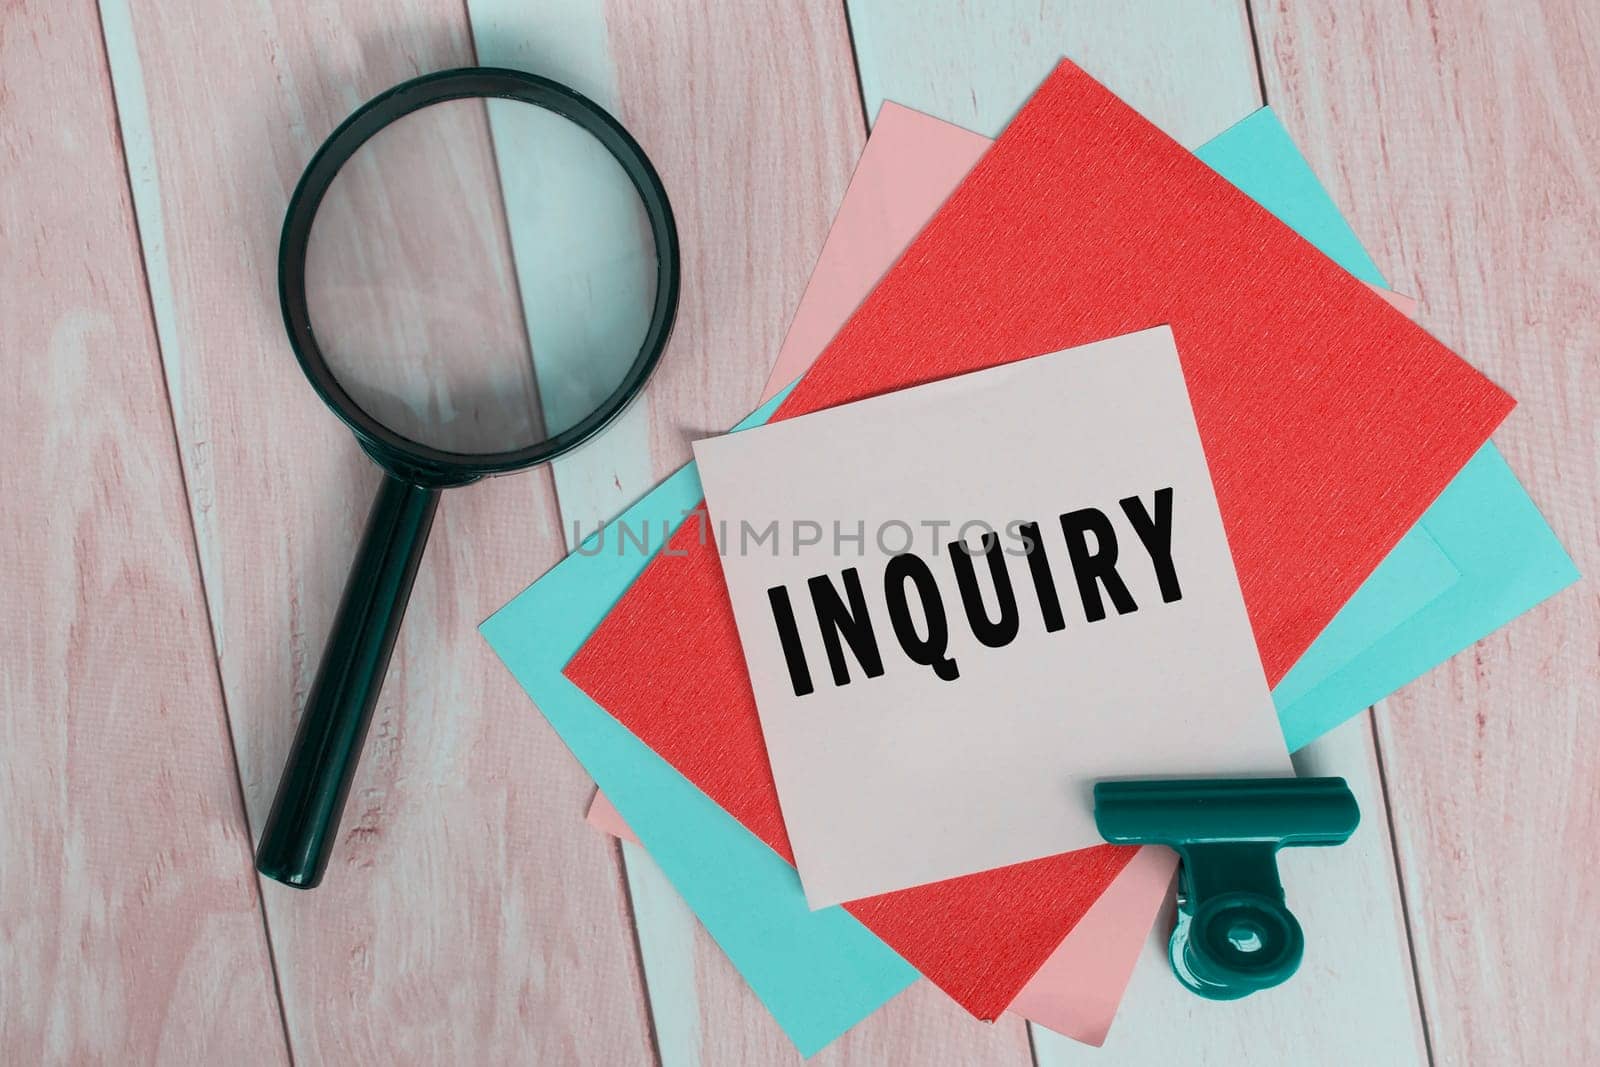 Inquiry word on colorful adhesive paper with magnifying glass on wooden desk.